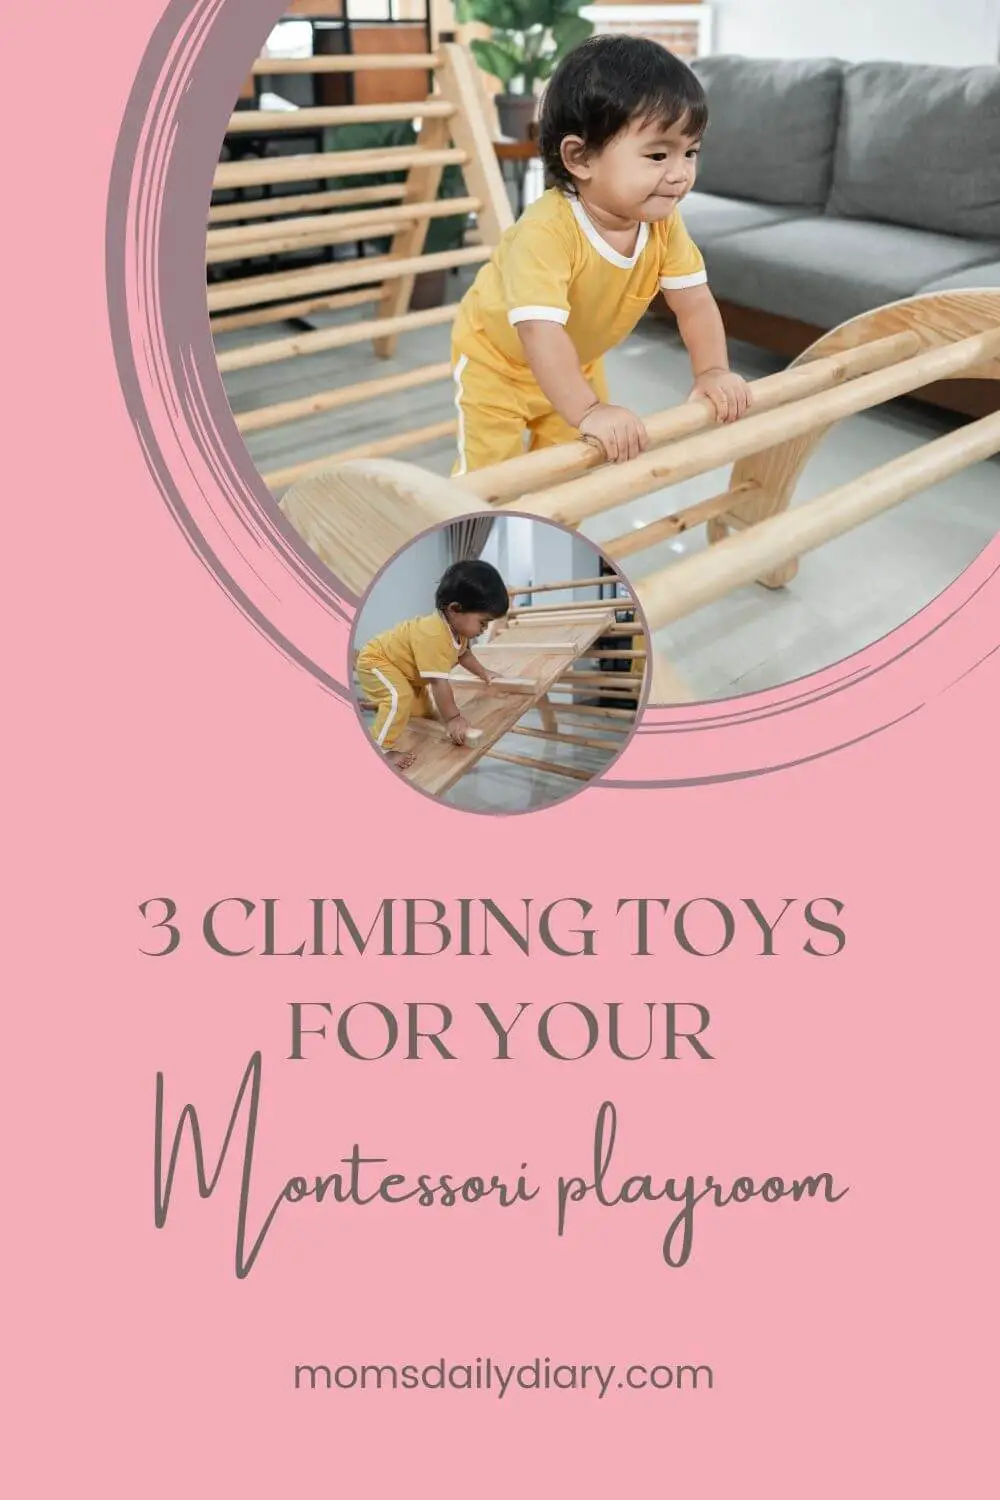 Pinterest pin with images of toddler playing on Montessori climbing toys and text "3 Climbing toys for your Montessori playroom"